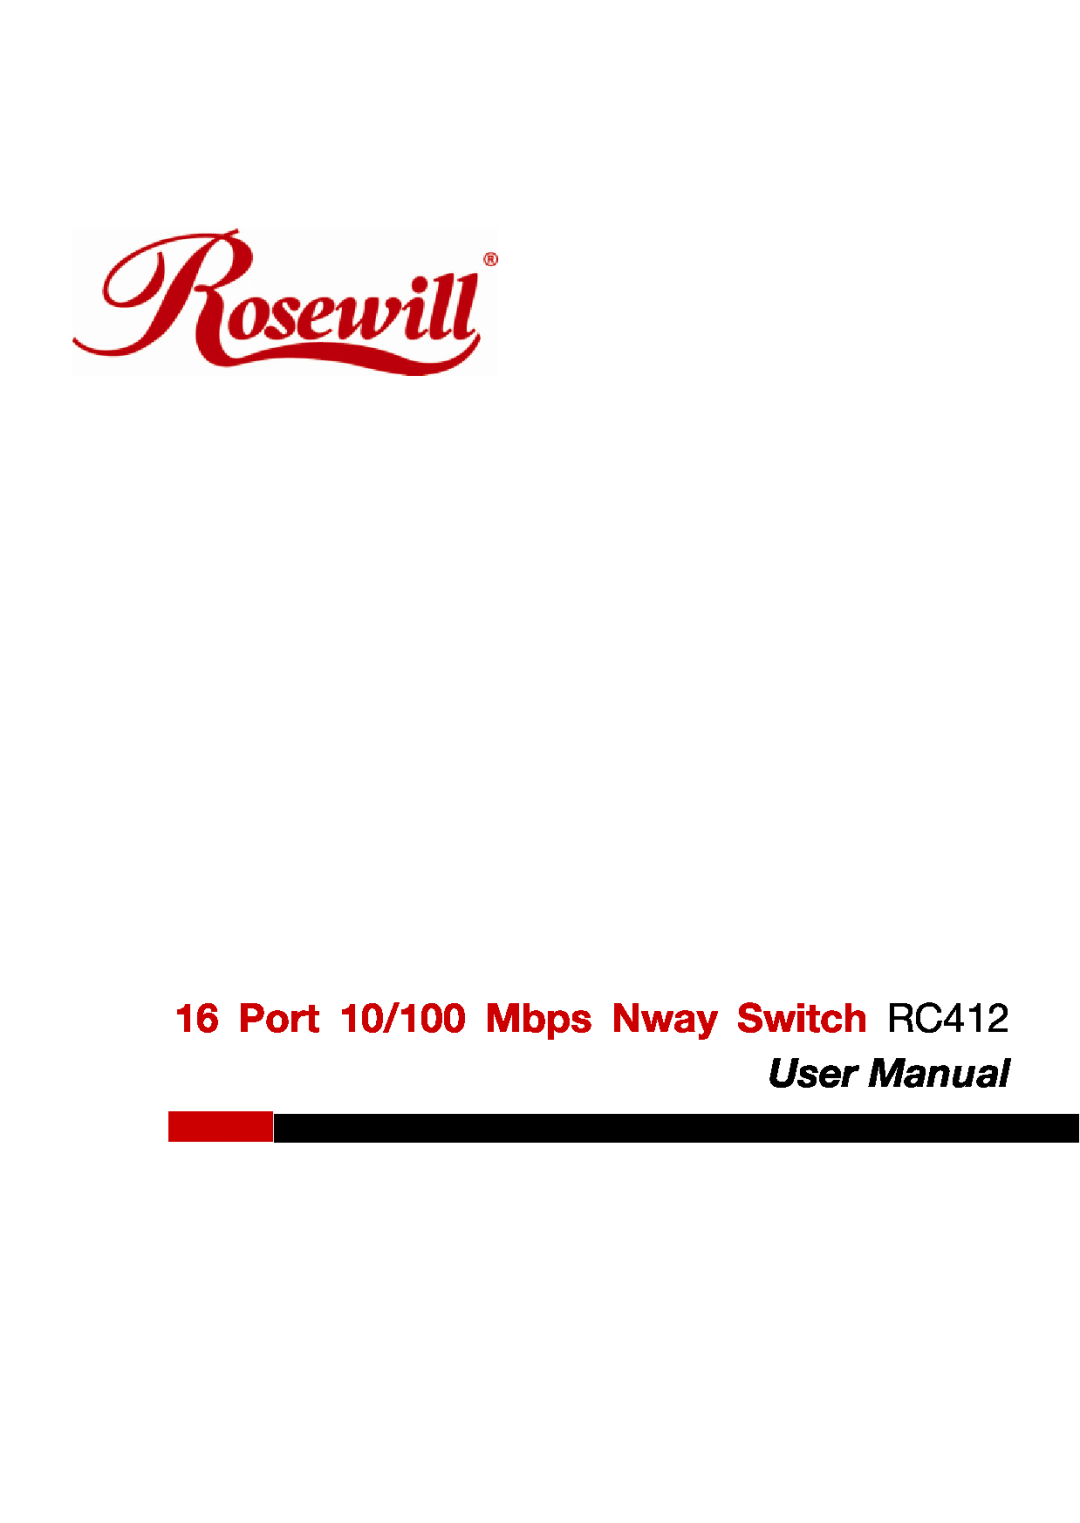 Rosewill user manual Port 10/100 Mbps Nway Switch RC412, User Manual 